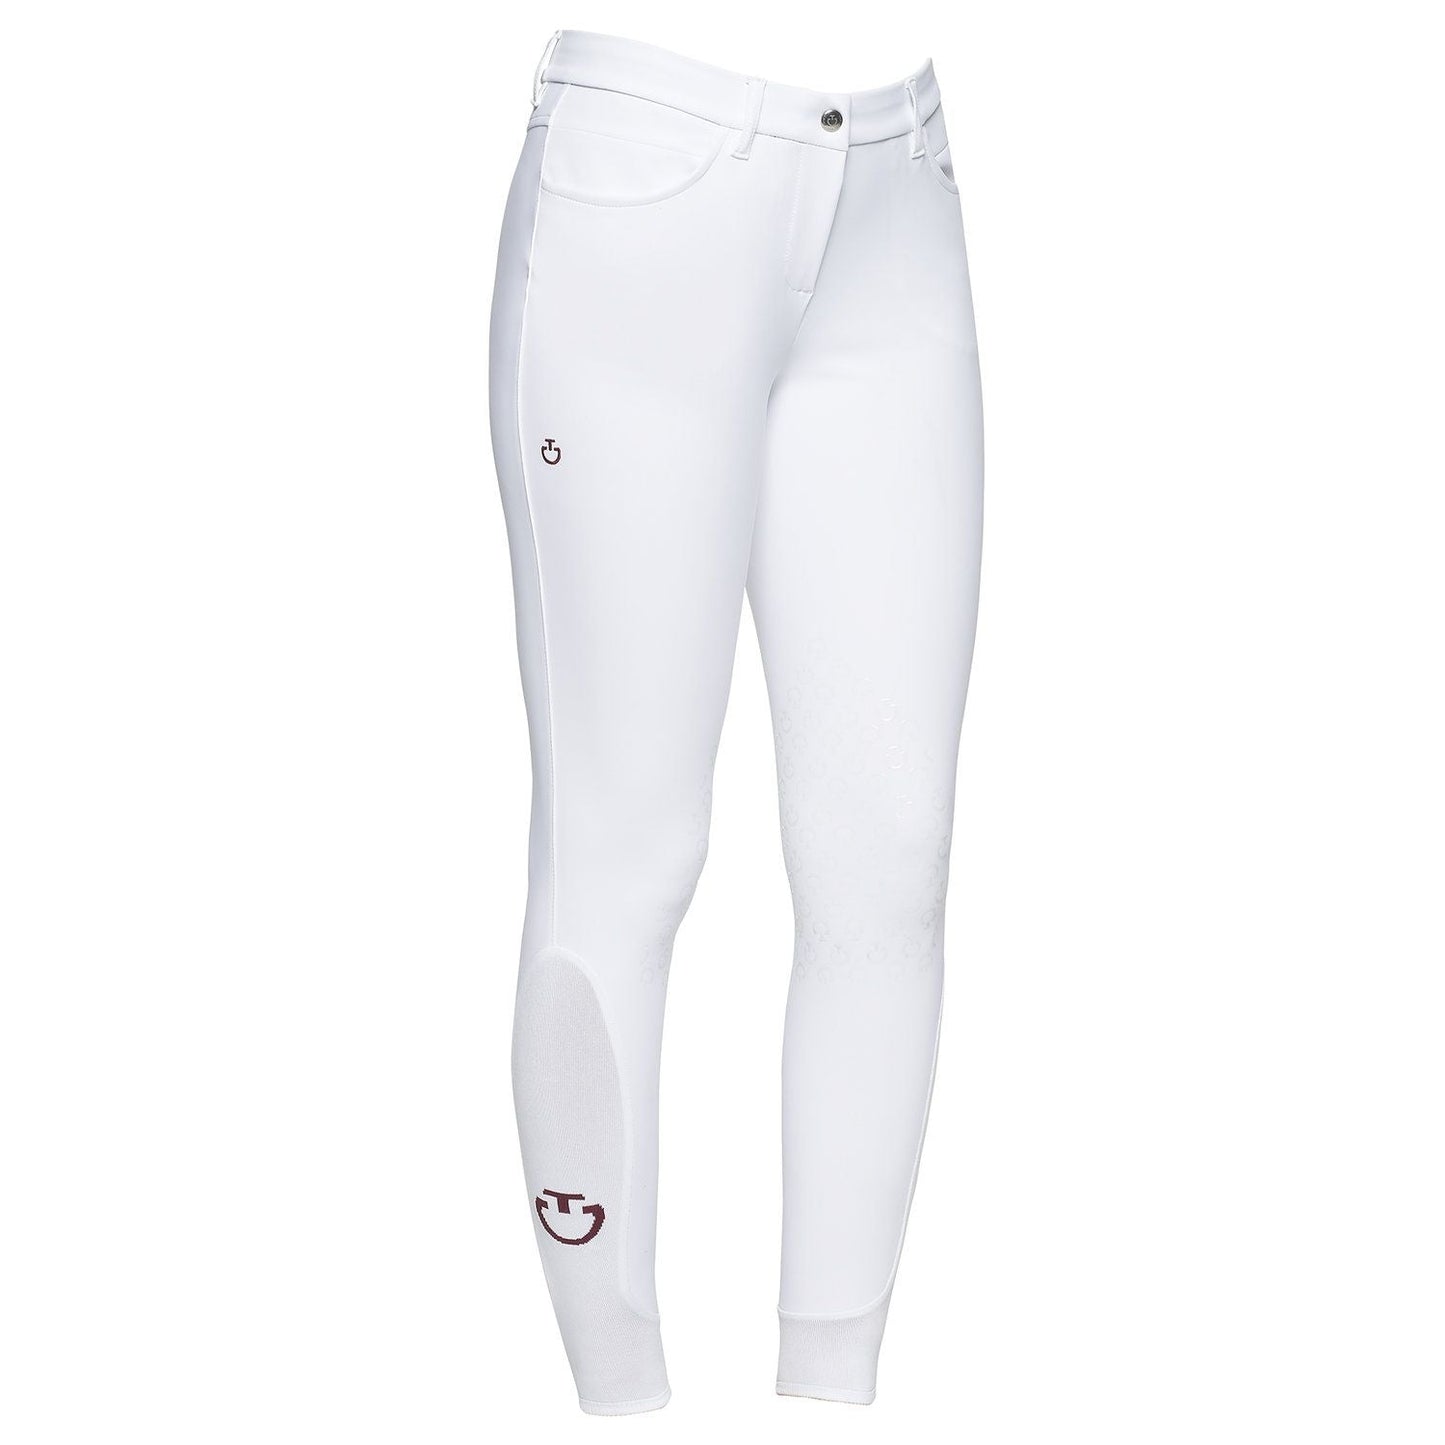 Cavalleria Toscana Ladies New Grip System Breeches - White-Trailrace Equestrian Outfitters-The Equestrian